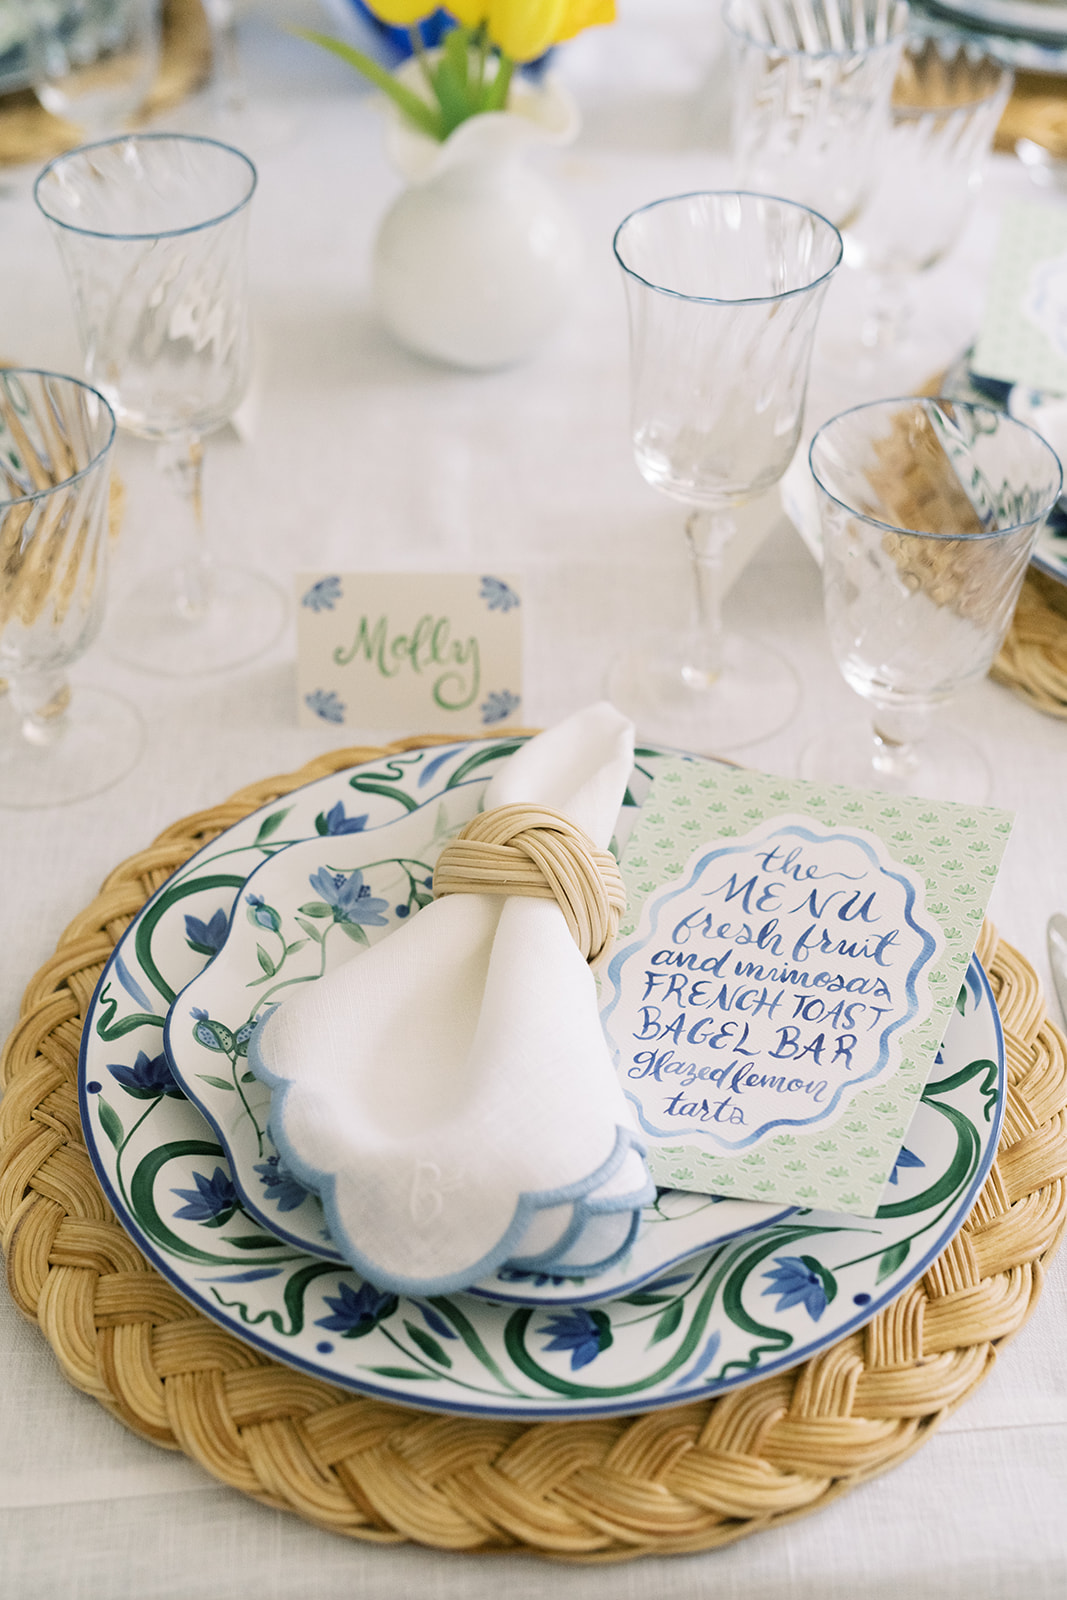 classic spring table, classic spring tablescape, springtime plates and dishes, spring dishes, classic Mother's Day tablescape, how to decorate for Mother's Day